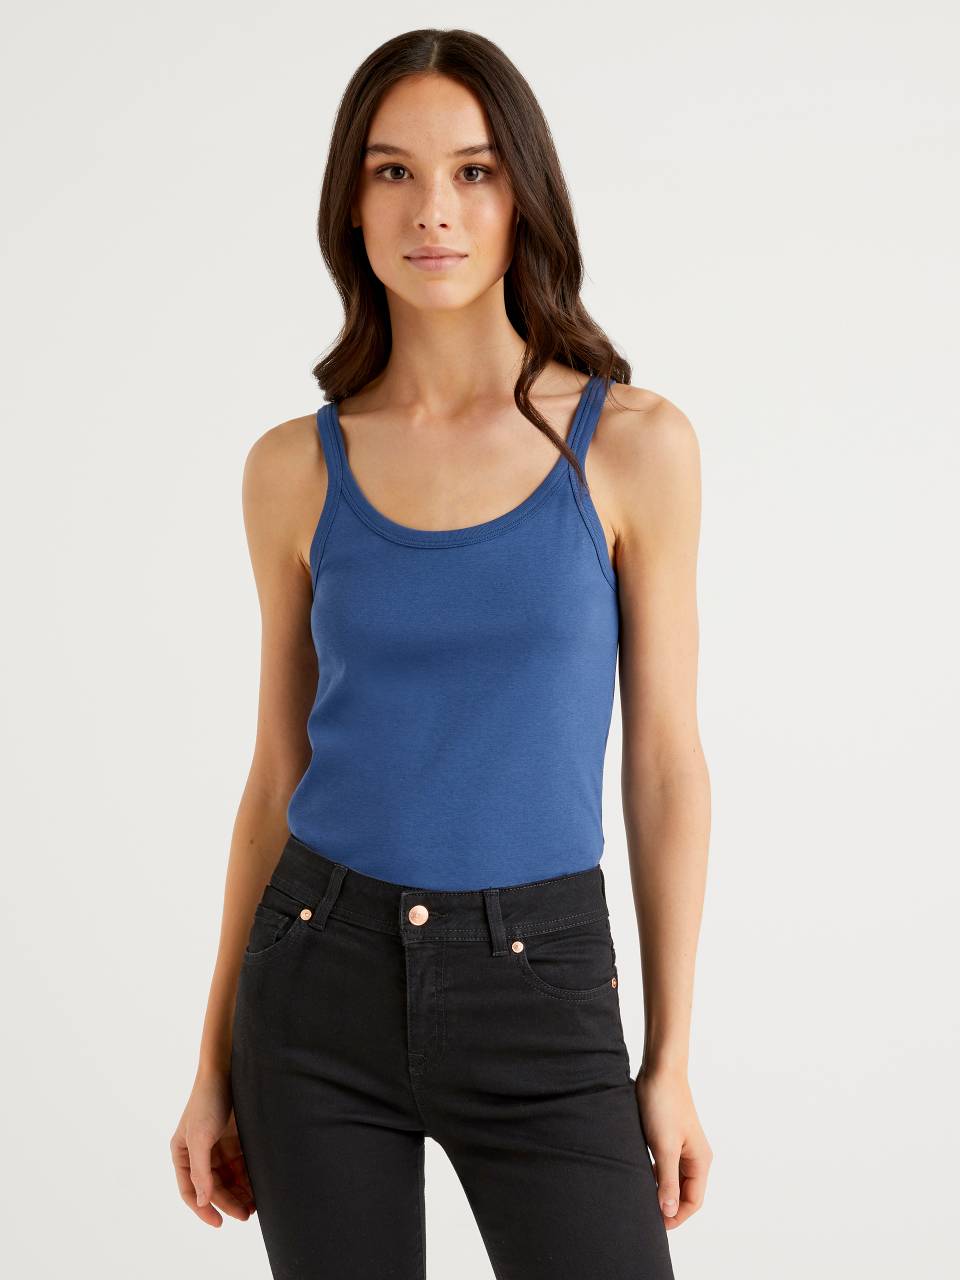 Benetton Blue tank top in pure cotton. 1